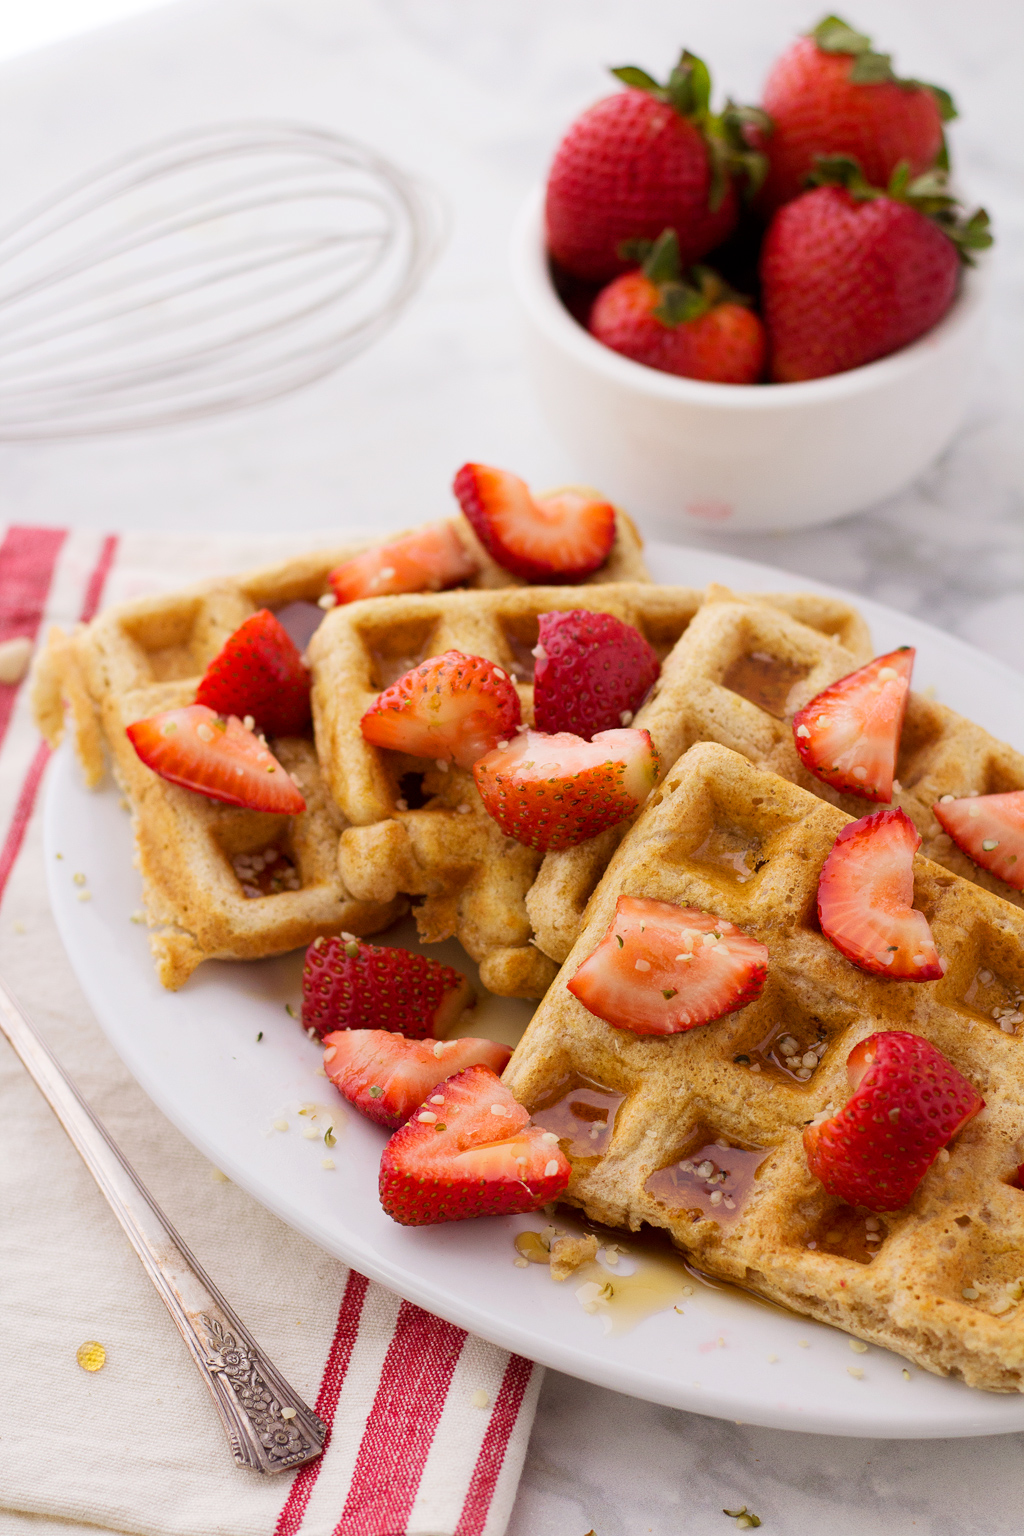 Finished vegan waffles topped with maple syrup, hemp seeds, and strawberries